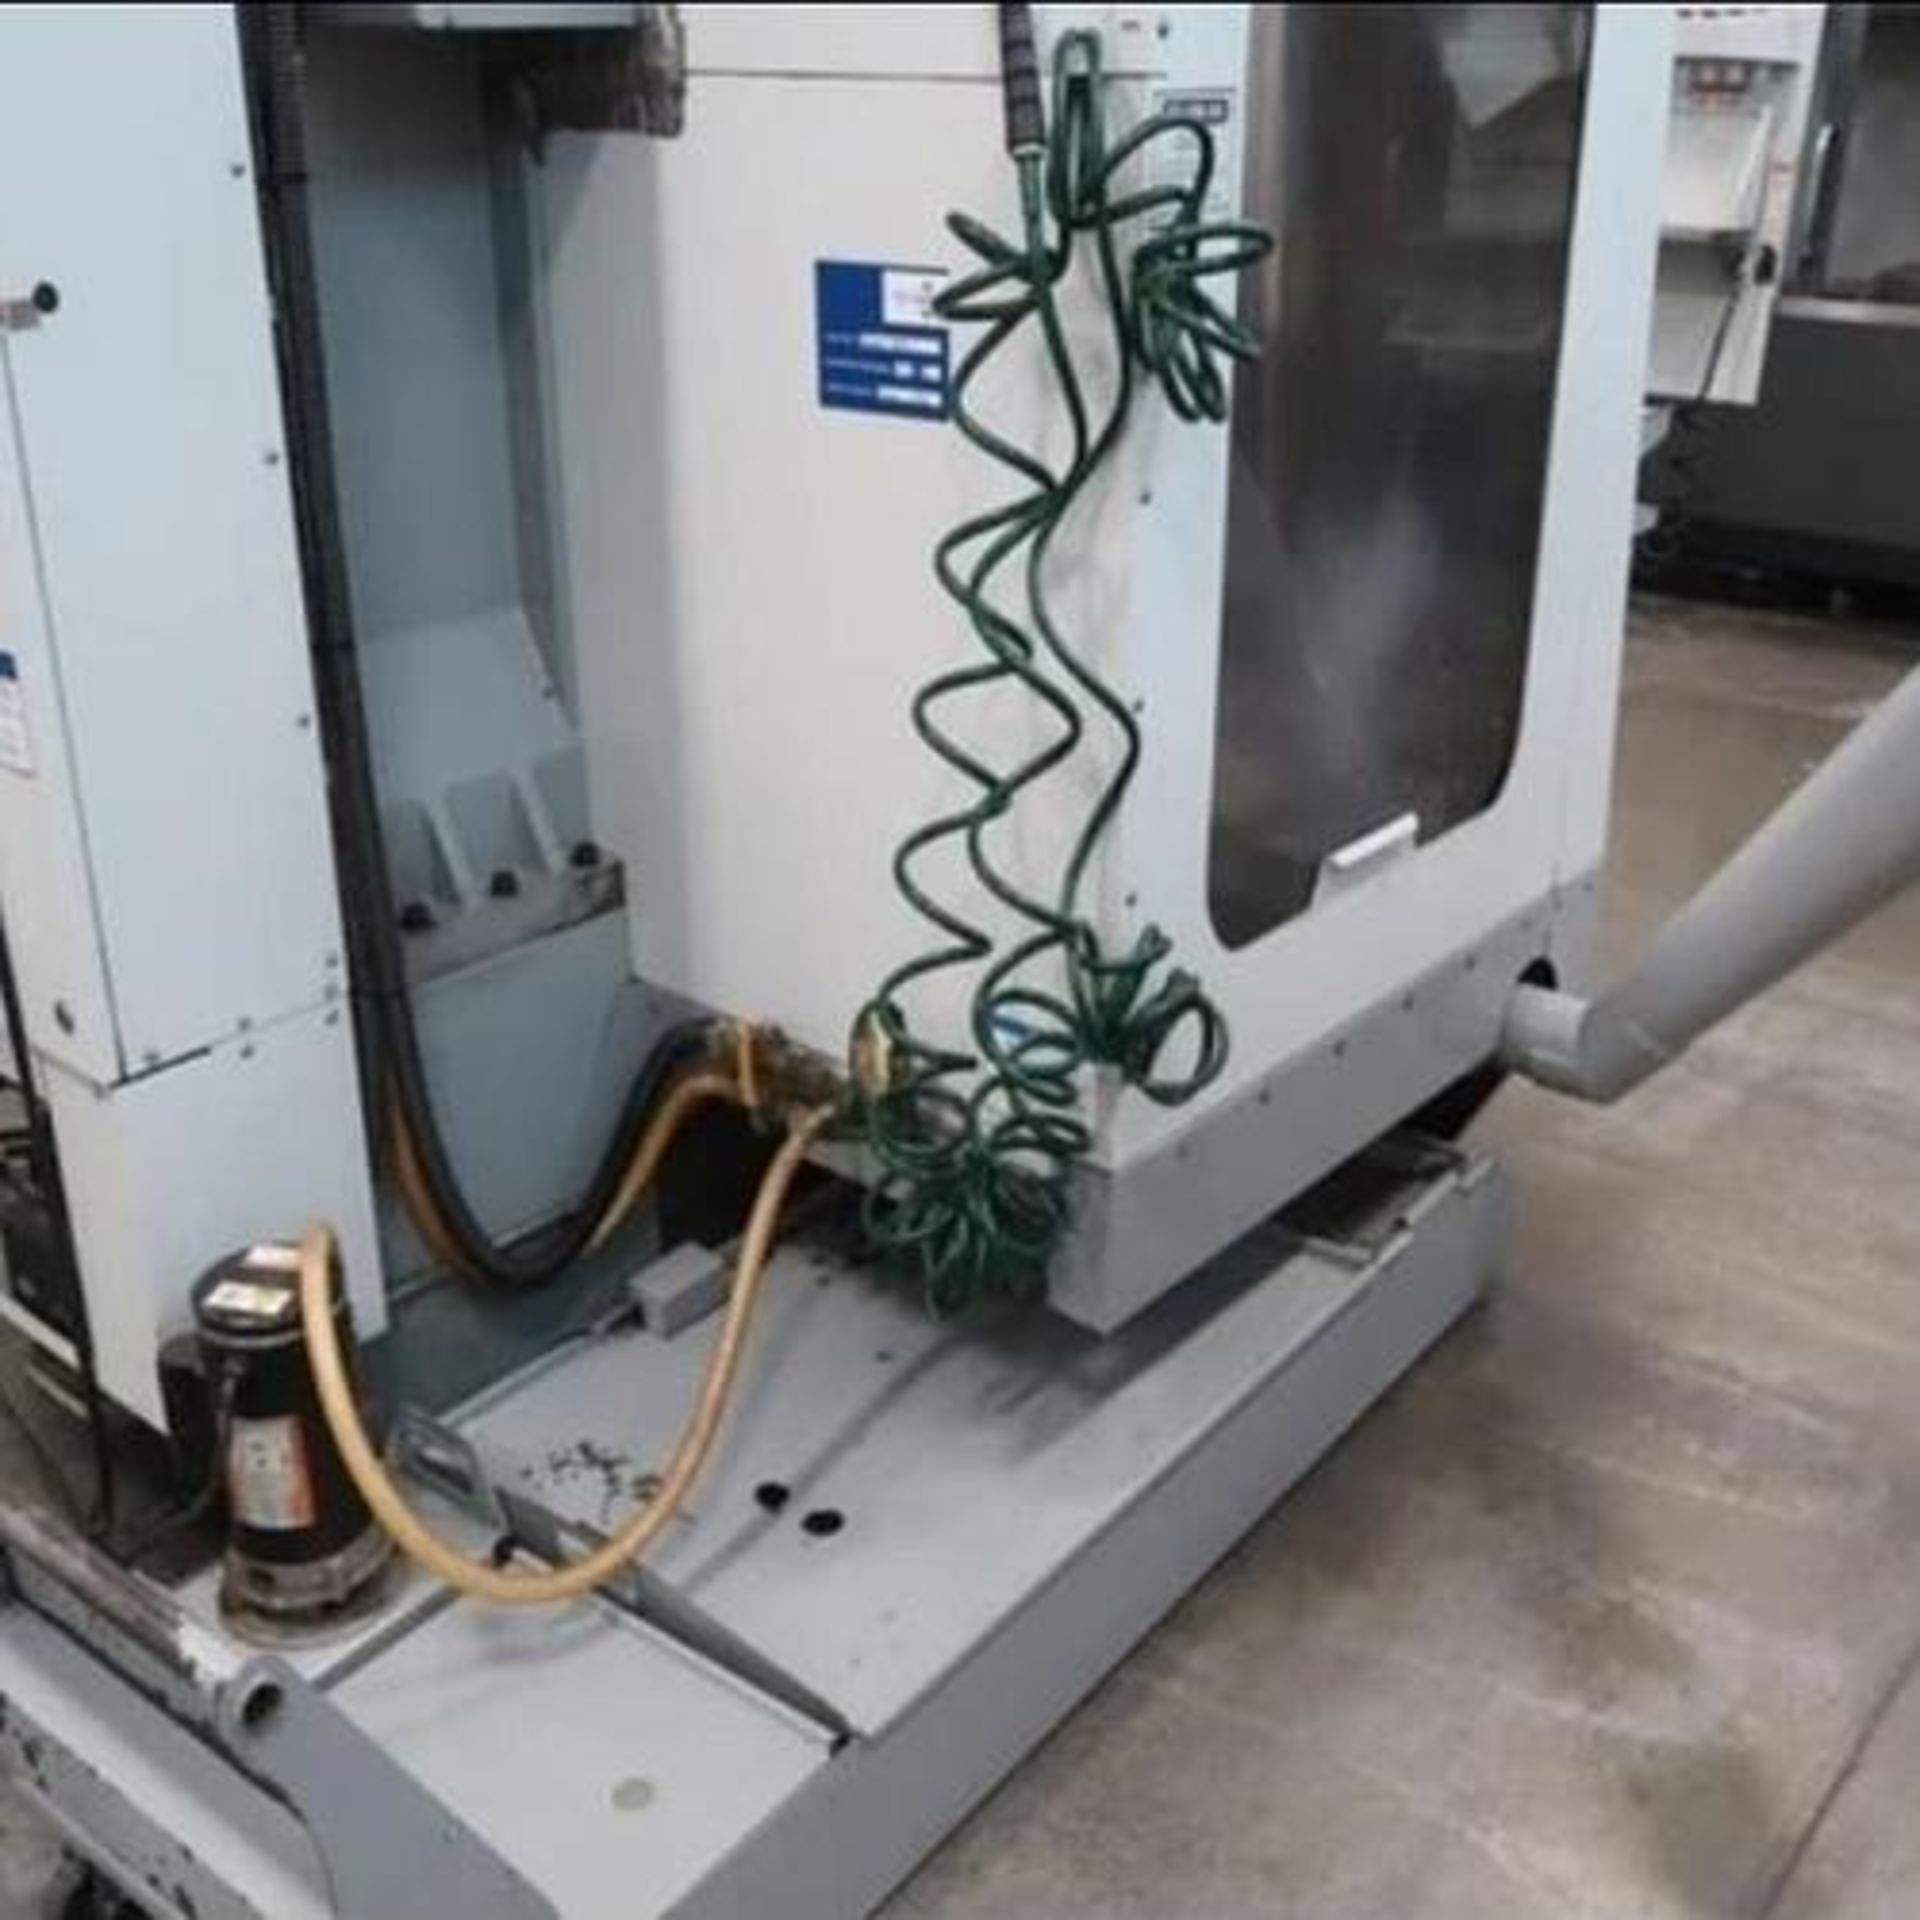 2007 HAAS VF-2 CNC Vertical Machining Center - Image 13 of 14